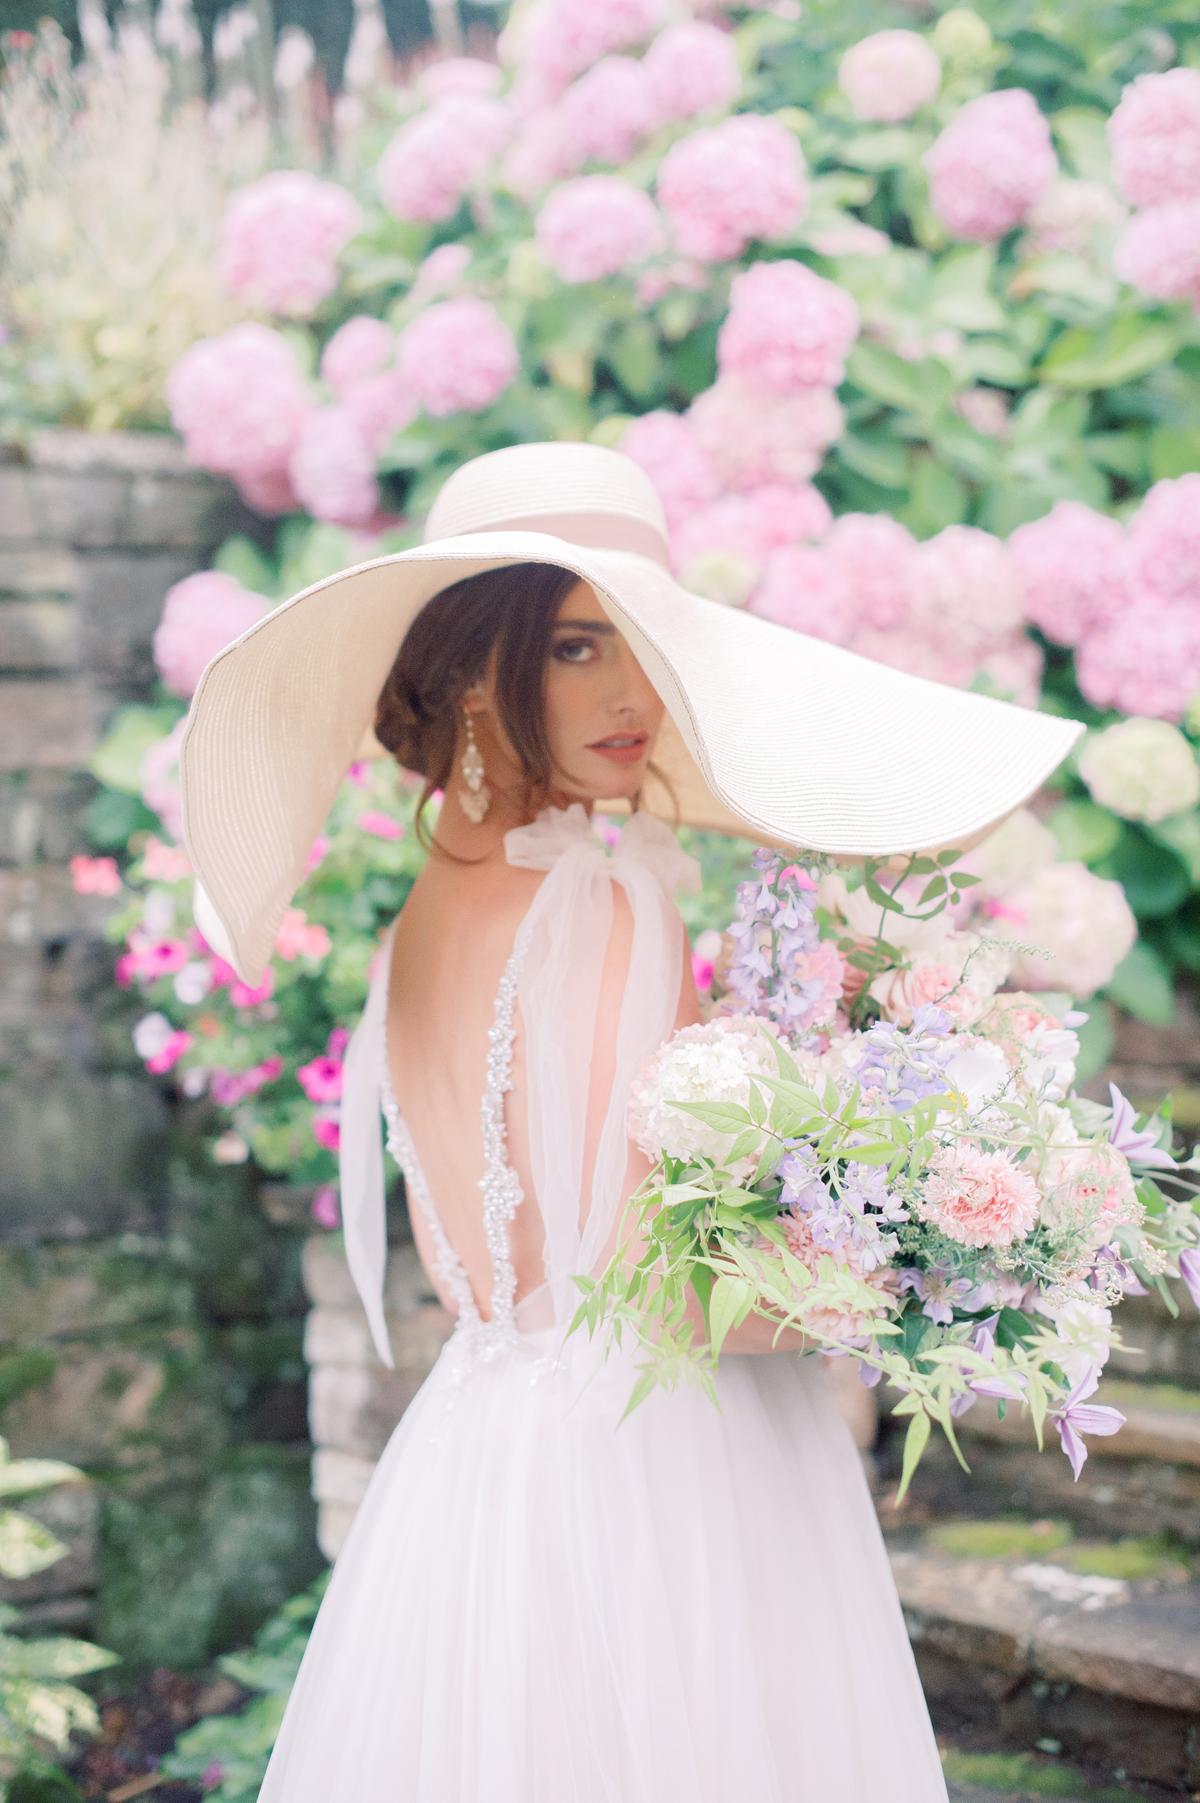 7 Things We Love About Spring Weddings (And the Must-Haves to Make